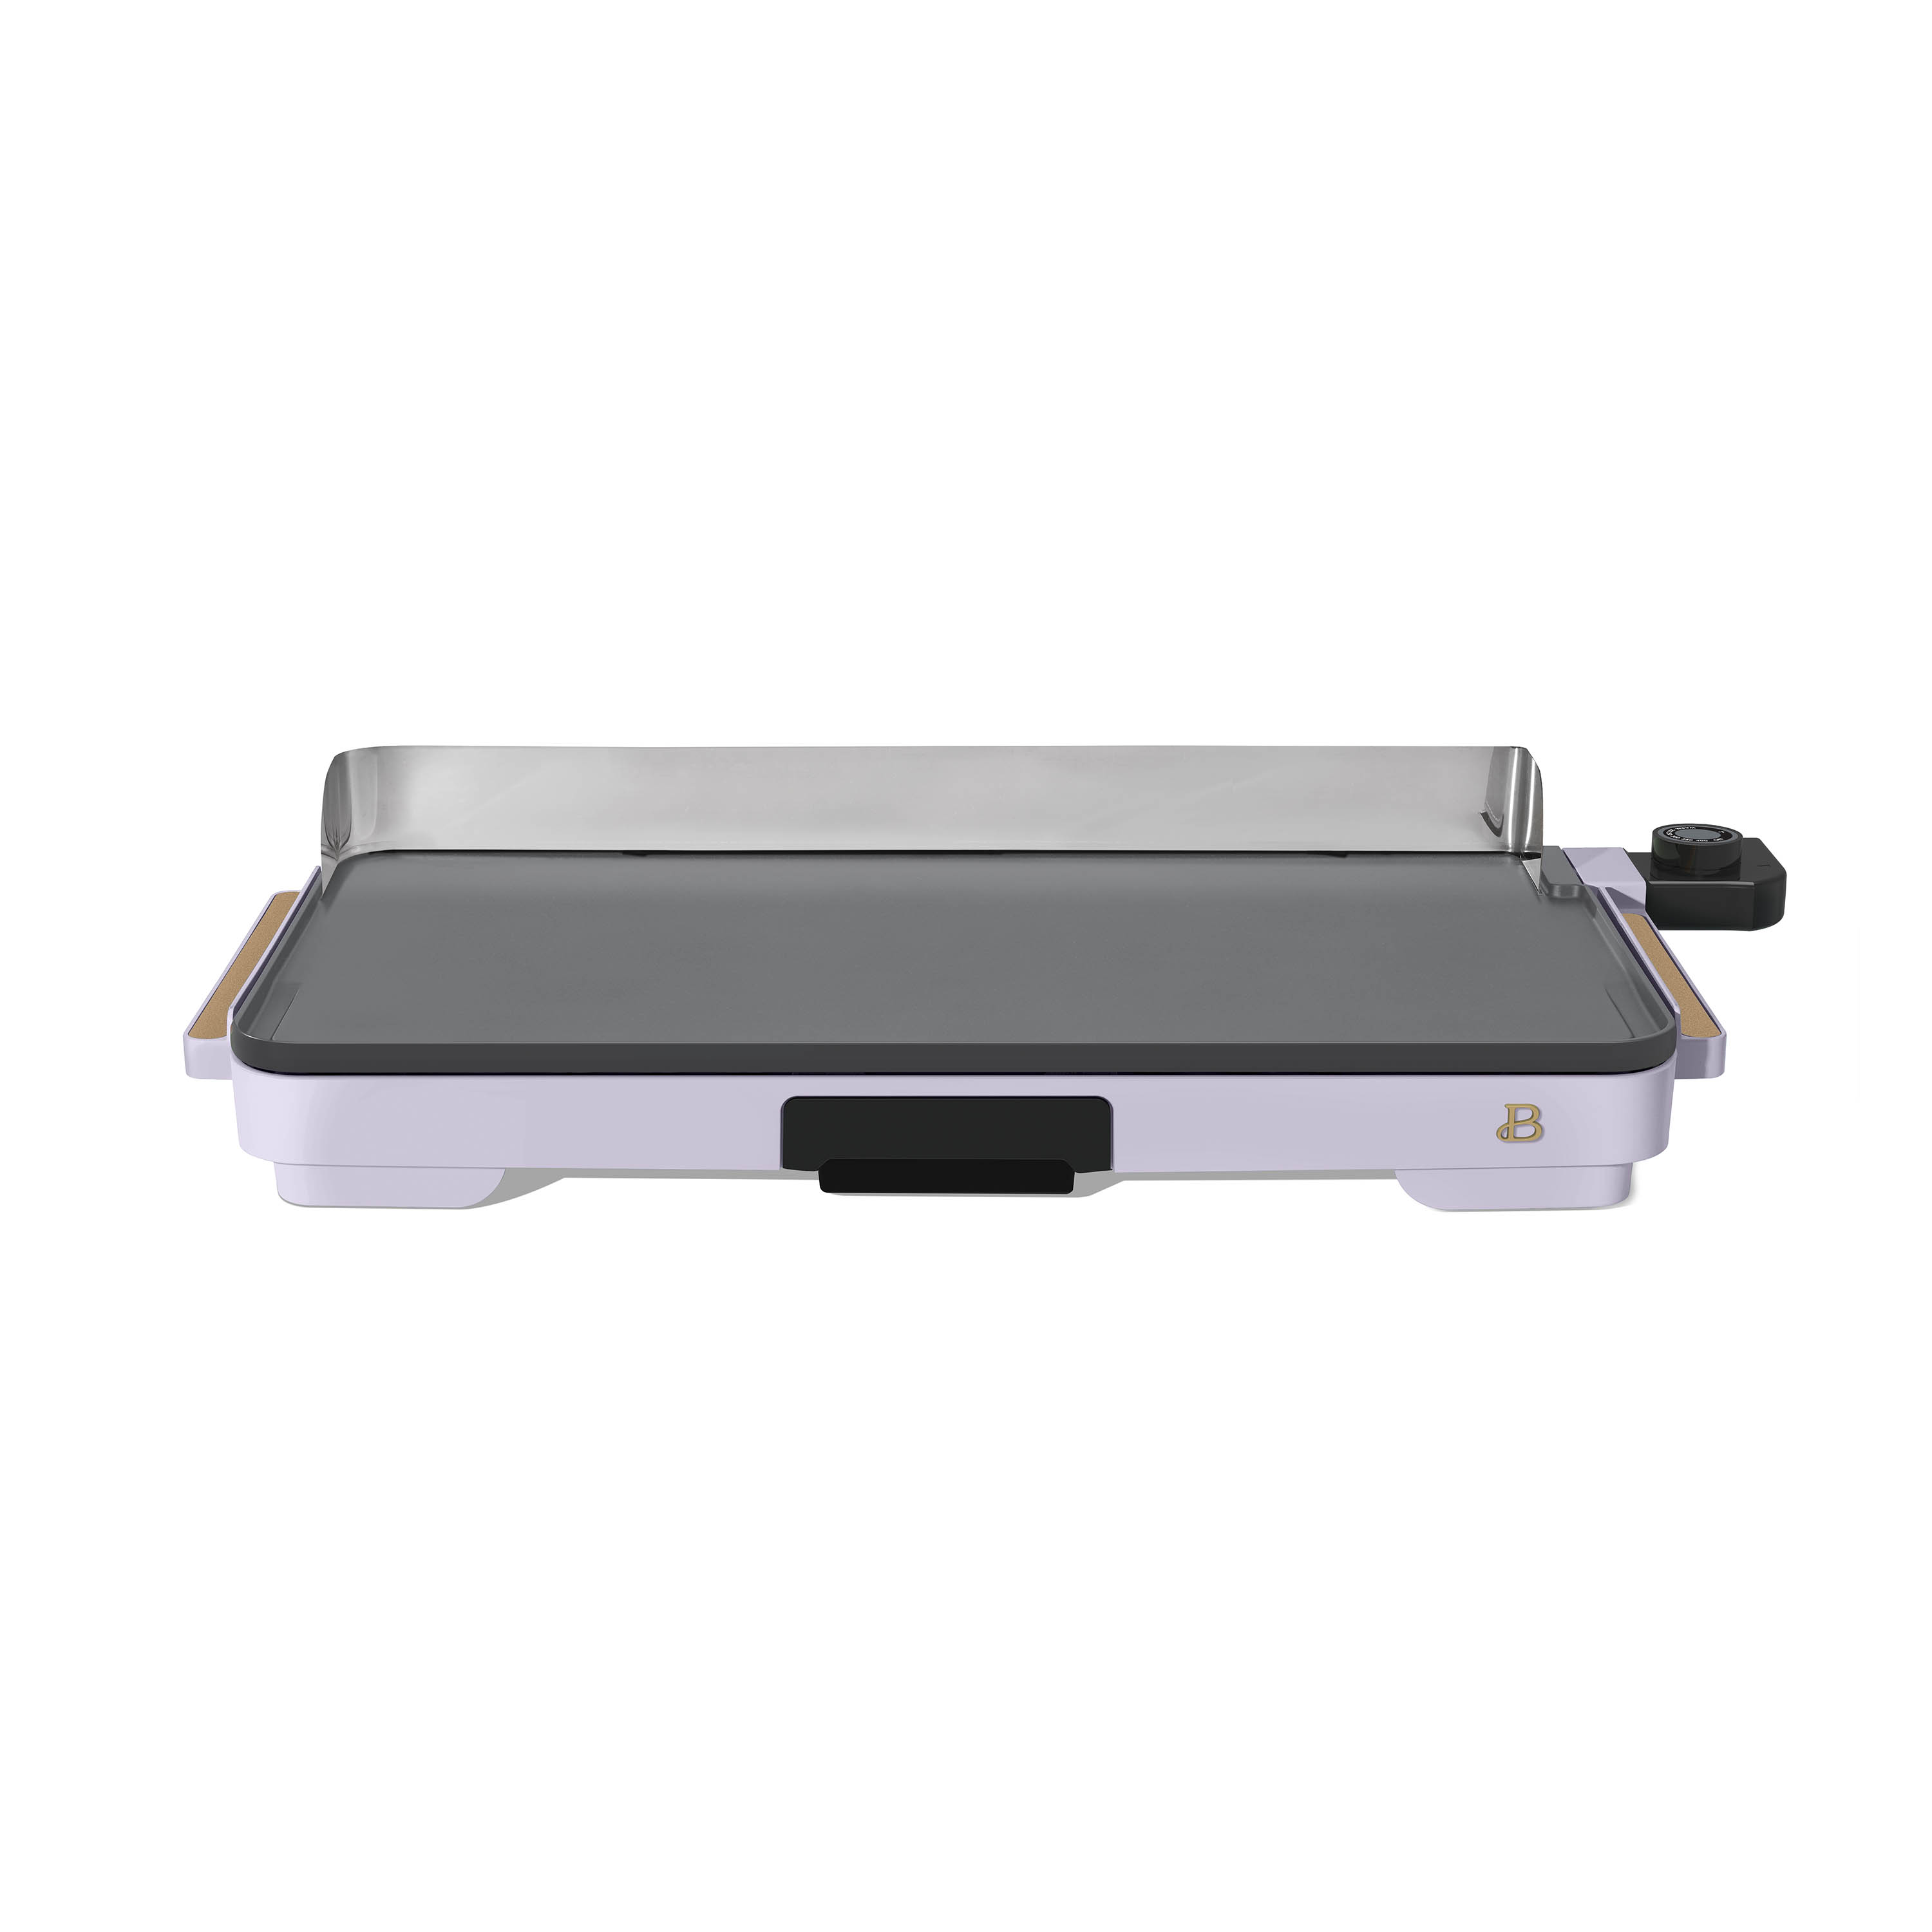 Beautiful XL Electric Griddle 12" x 22"- Non-Stick, Lavender by Drew Barrymore - image 1 of 6